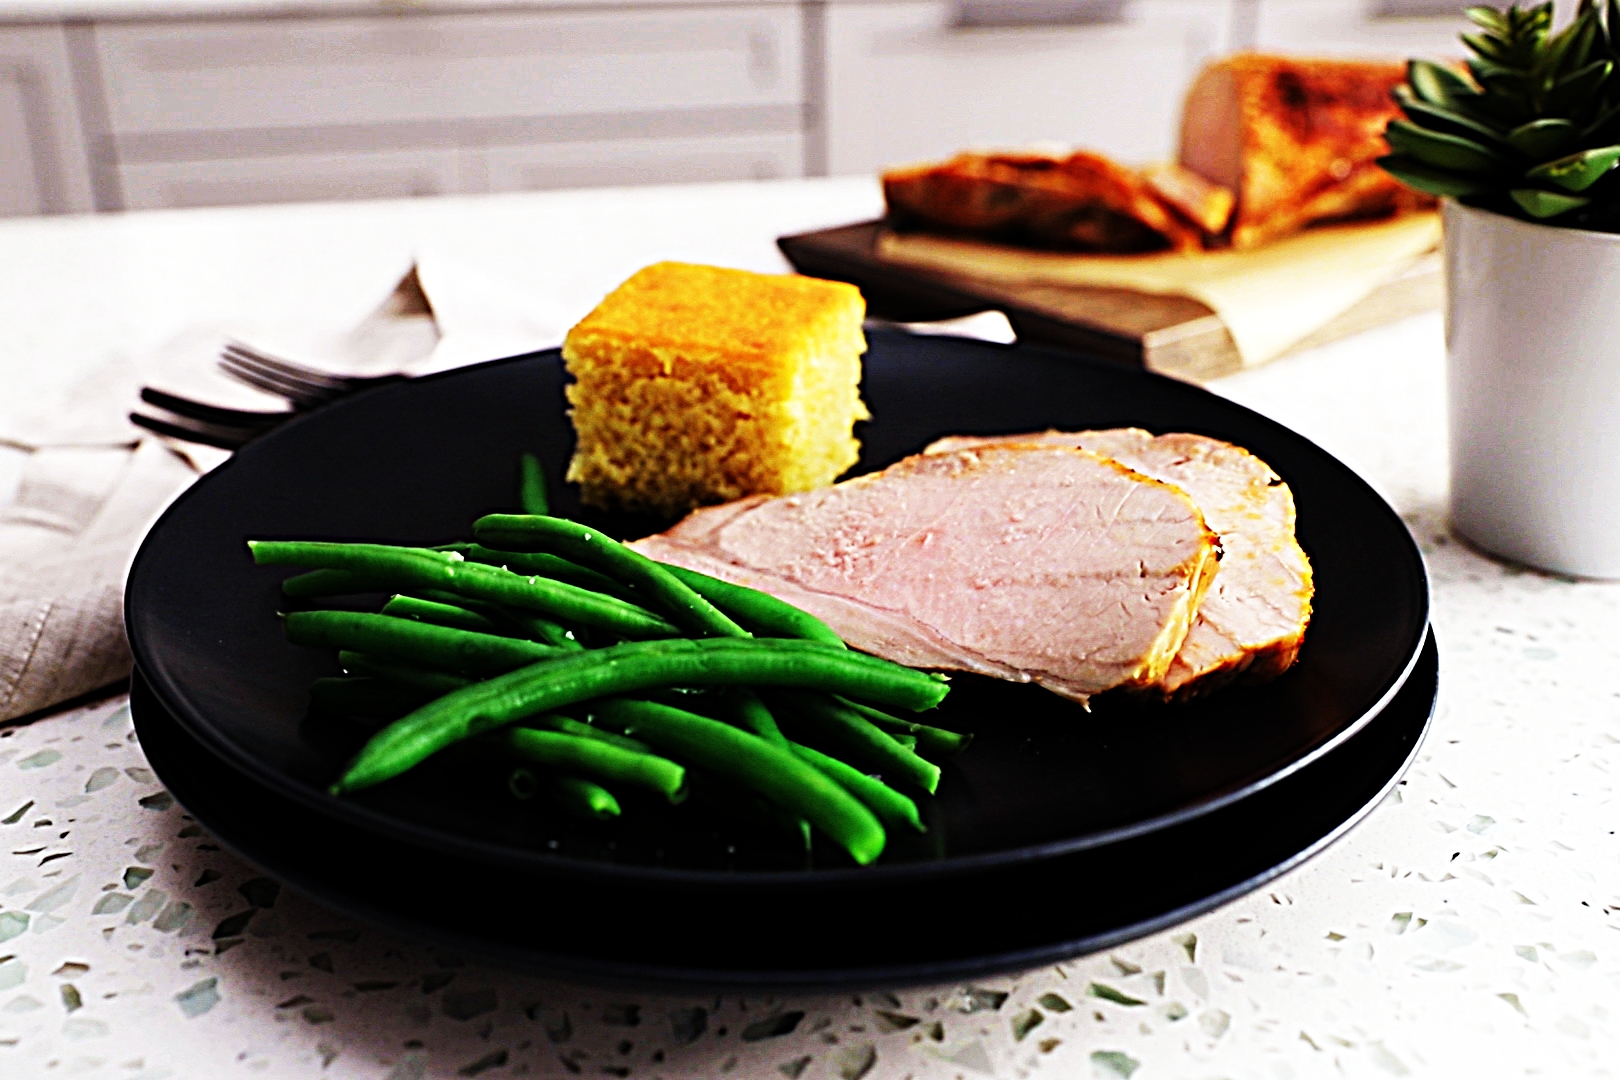 Stupid-Easy Recipe for Simple Roasted Pork Loin (#1 Top-Rated)